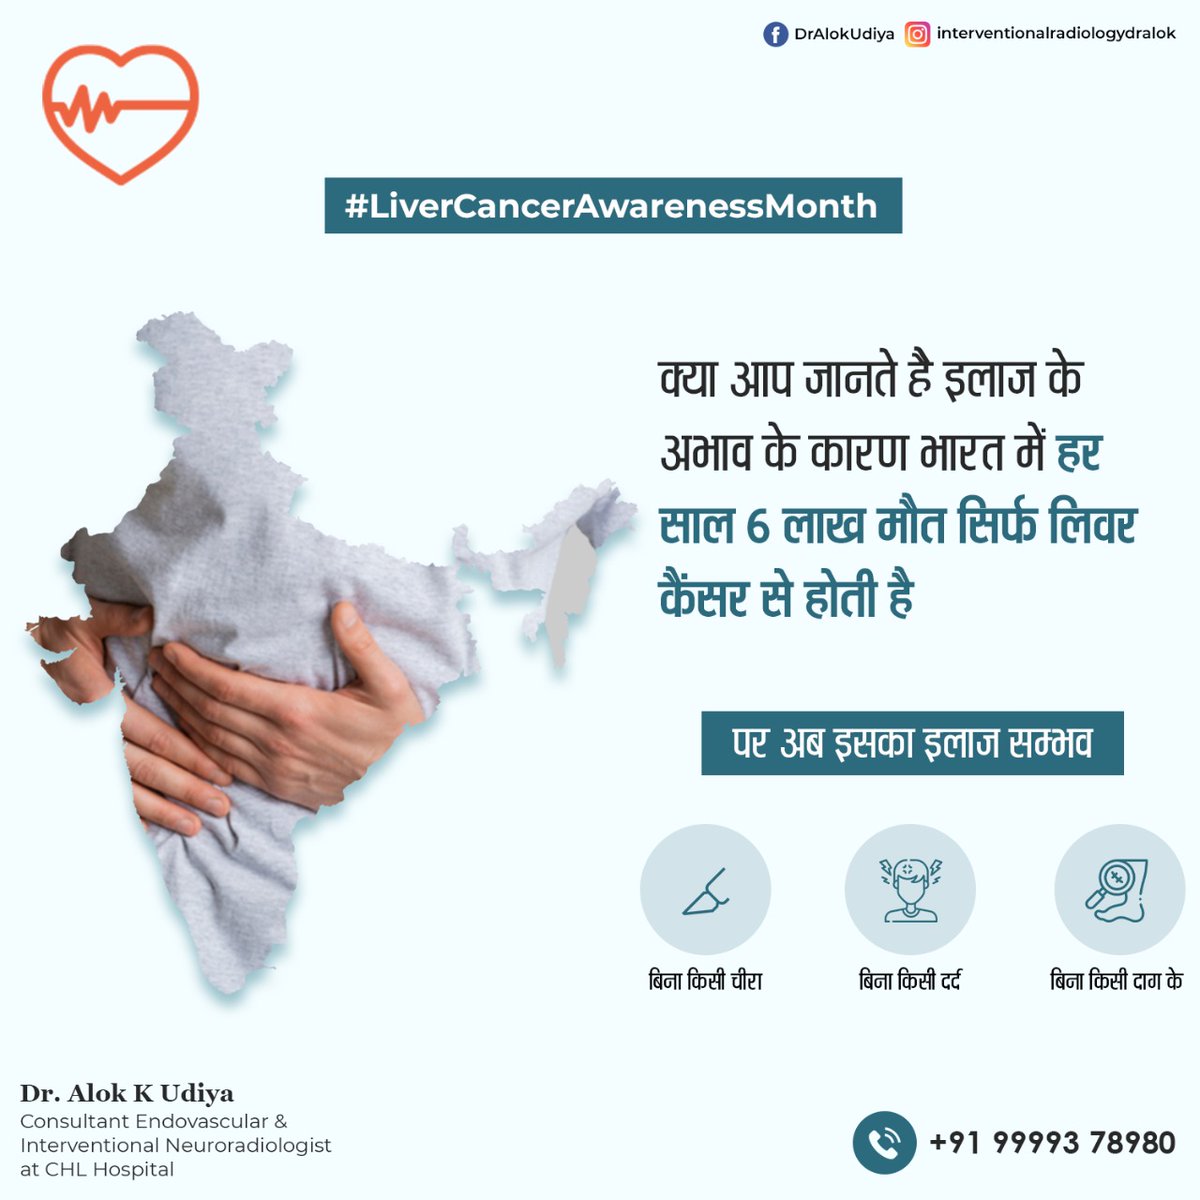 Liver Cancer Awareness
DON'T WAIT!
Schedule Your Appointment For Early Diagnosis         
Dr. Alok K Udiya            
+91 91 99993 78980  
#DrALOKUDIYA #interventionalneuroradiologist #livercancer #liverawareness #livercancerawarnessmonth #livermonth #cancer